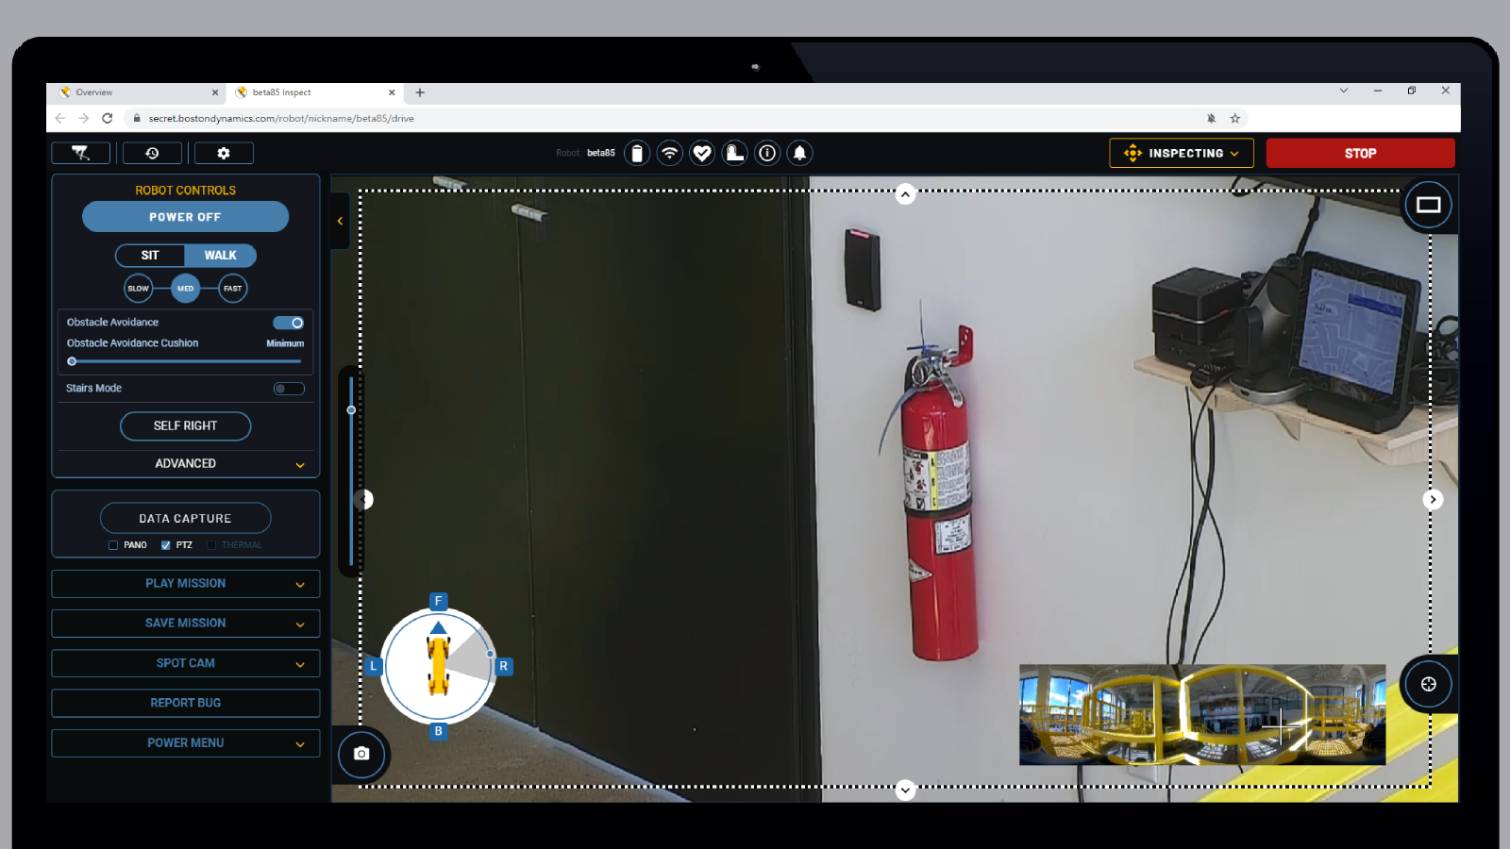 A screen capture showing a fire extinguisher correctly installed